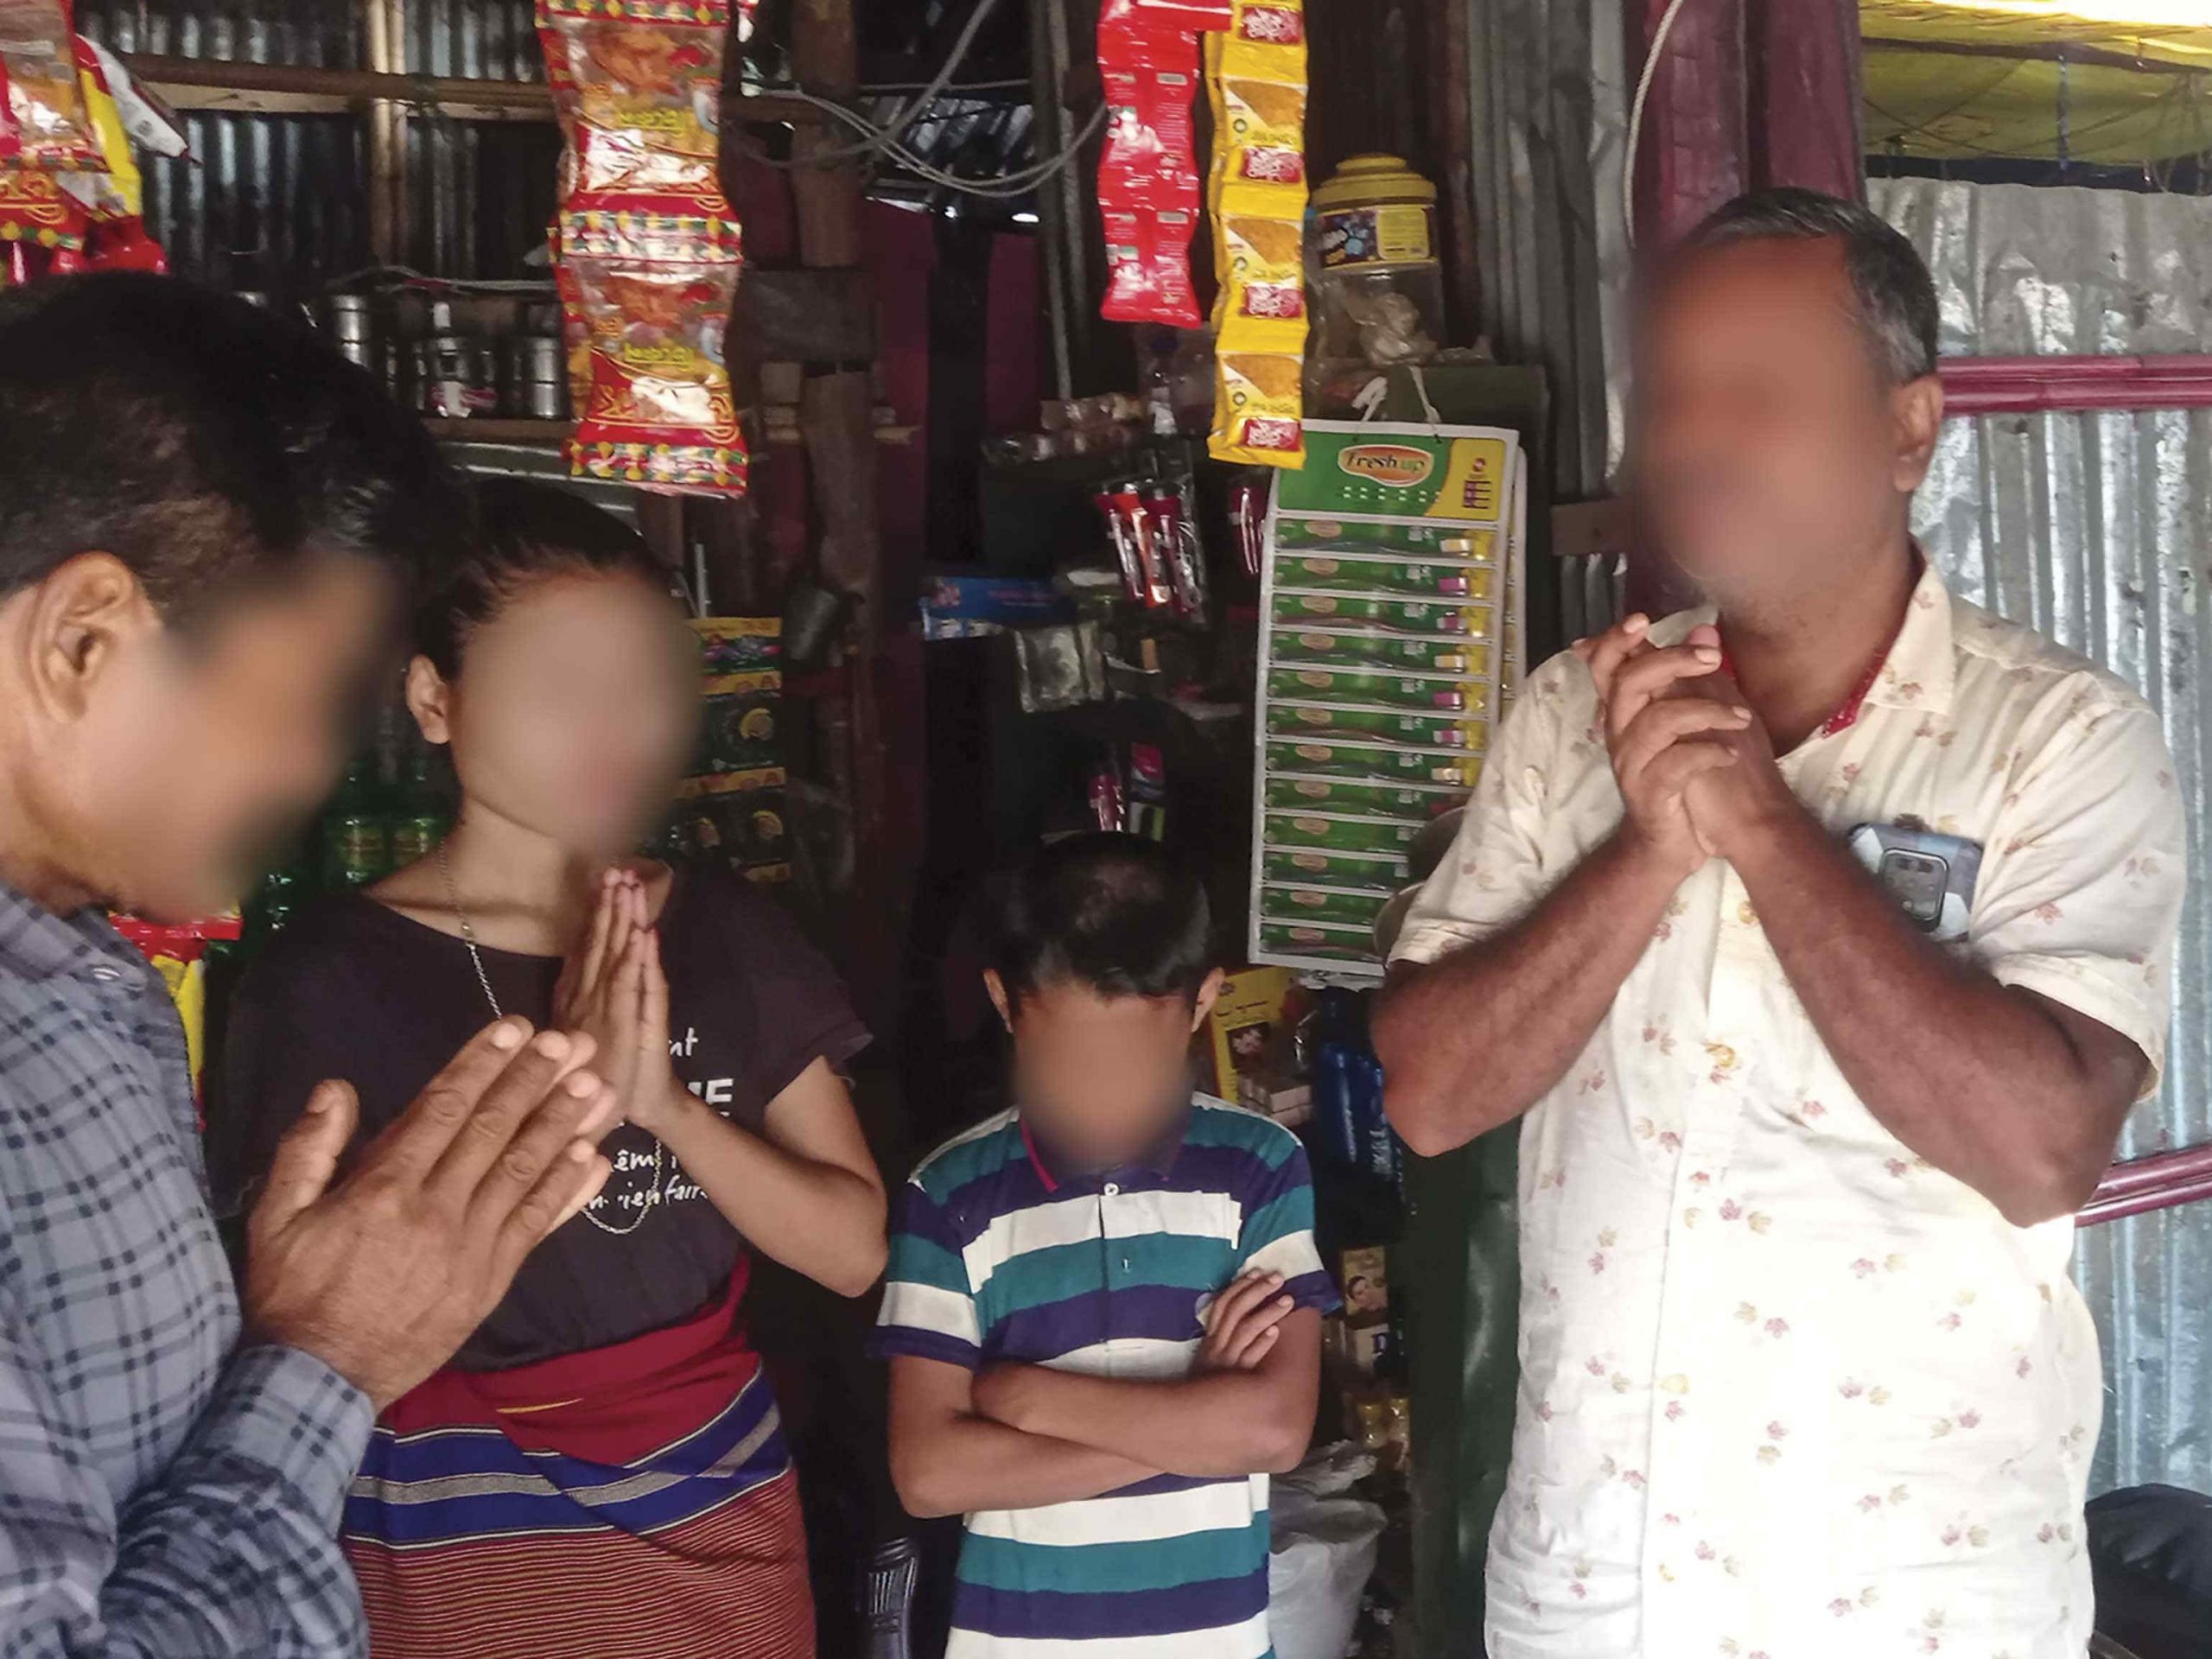 Christians in Bangladesh praying in a local store